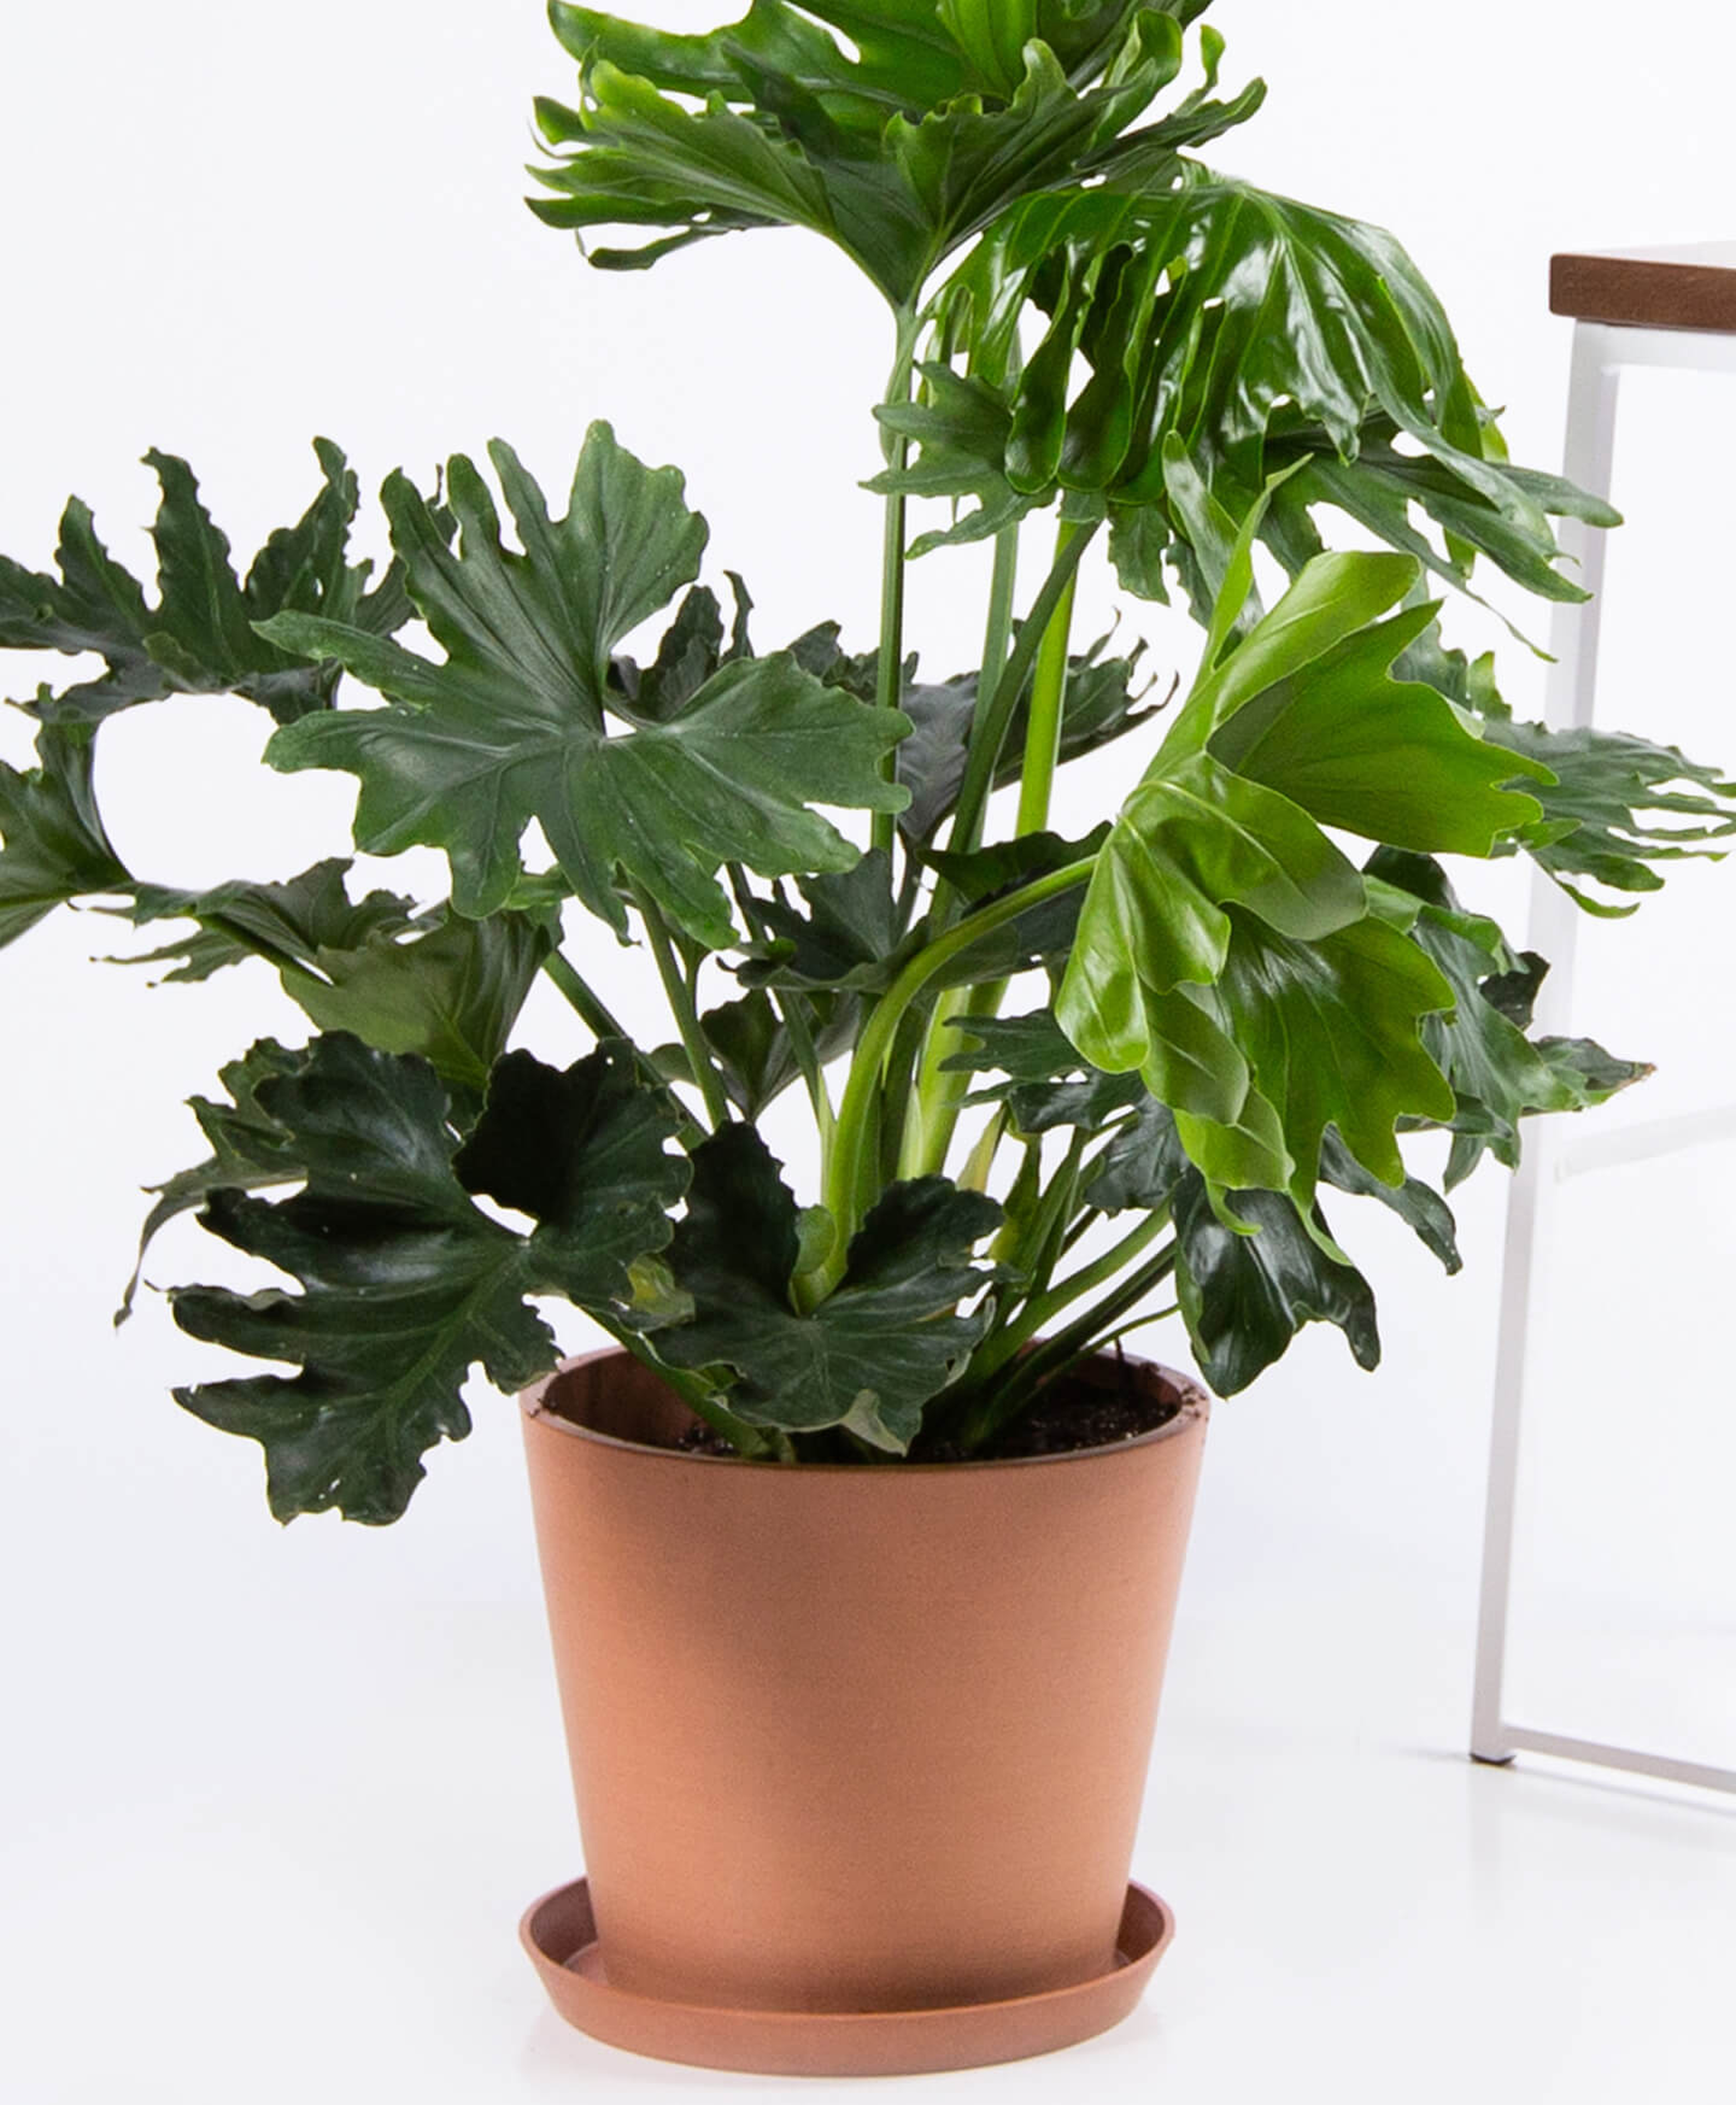 Philodendron hope selloum - Clay - Bloomscape